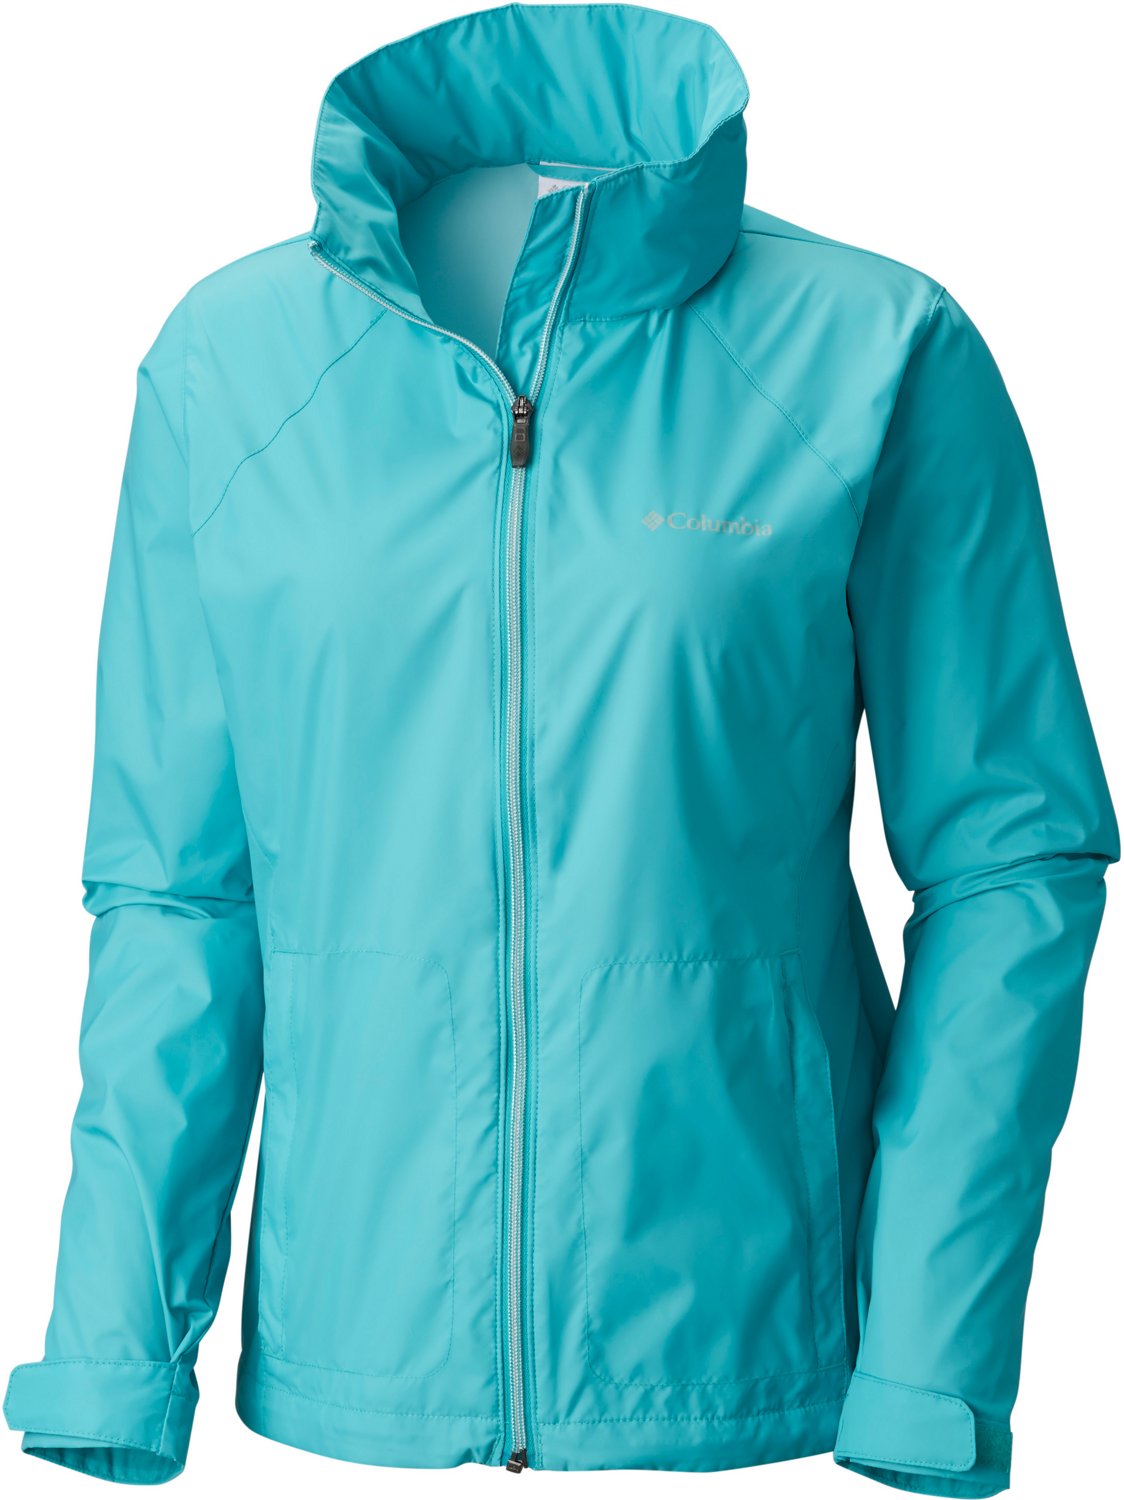 north face women's jacket academy 